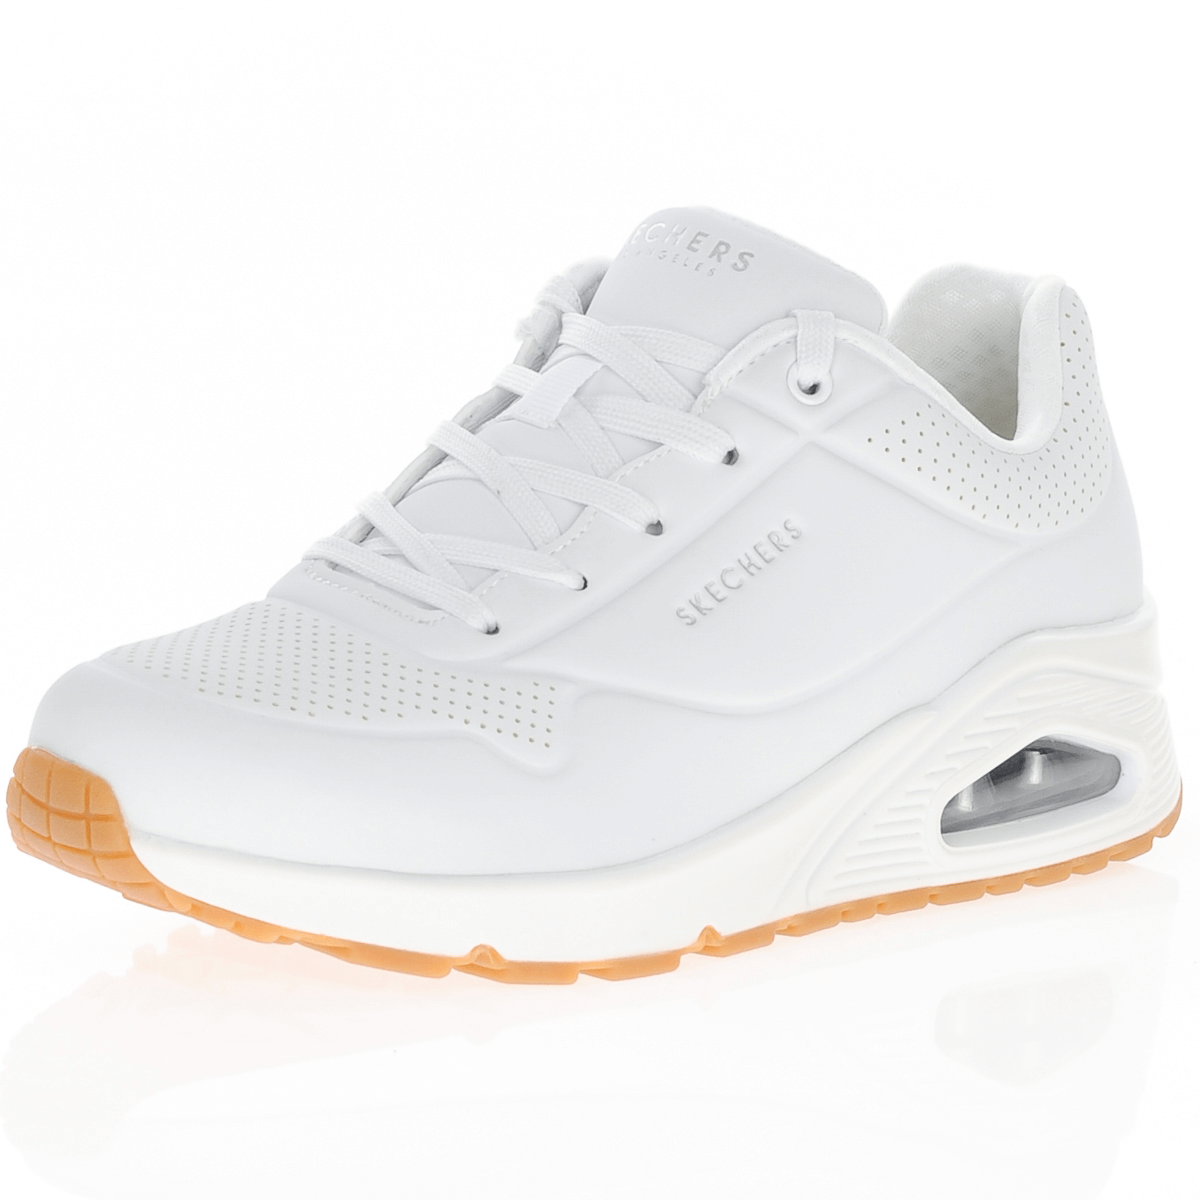 Skechers - Uno Stand On Air, White, The 